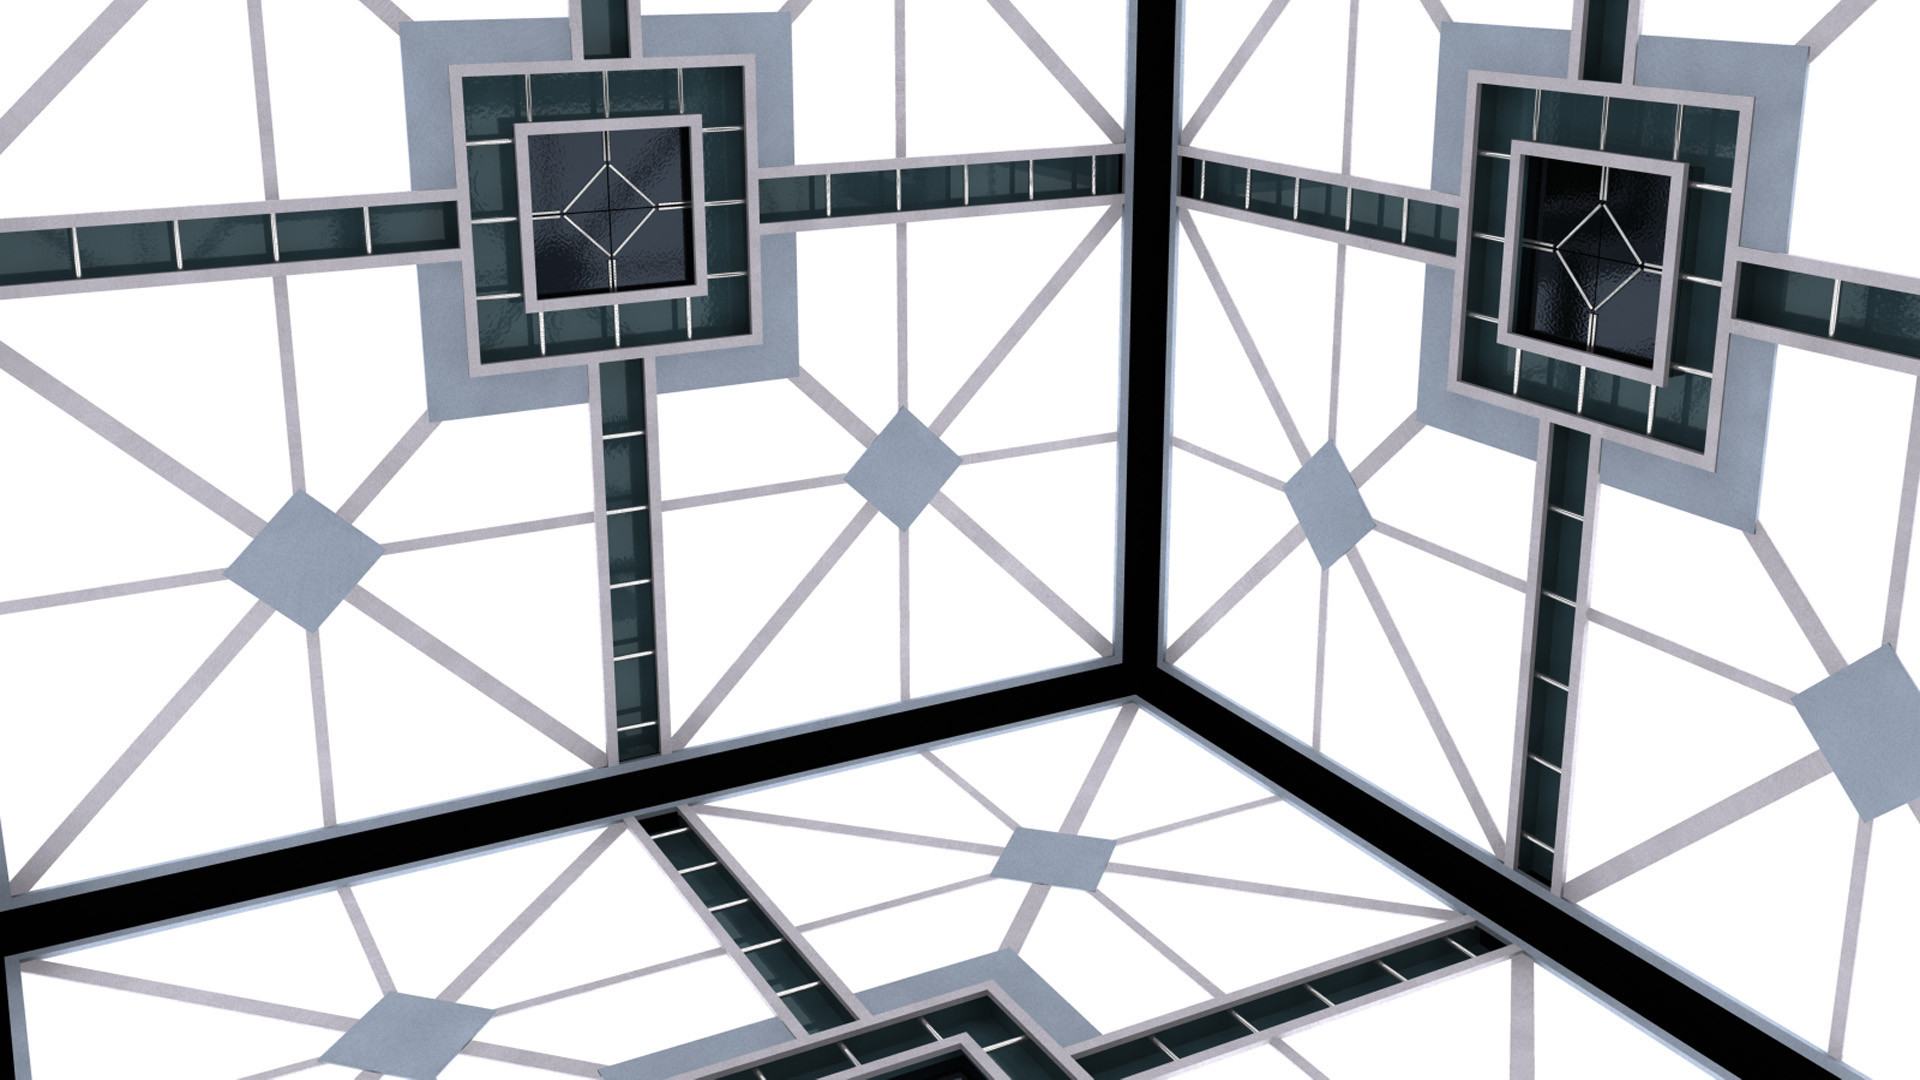 Amazing Cube 2: Hypercube Pictures & Backgrounds